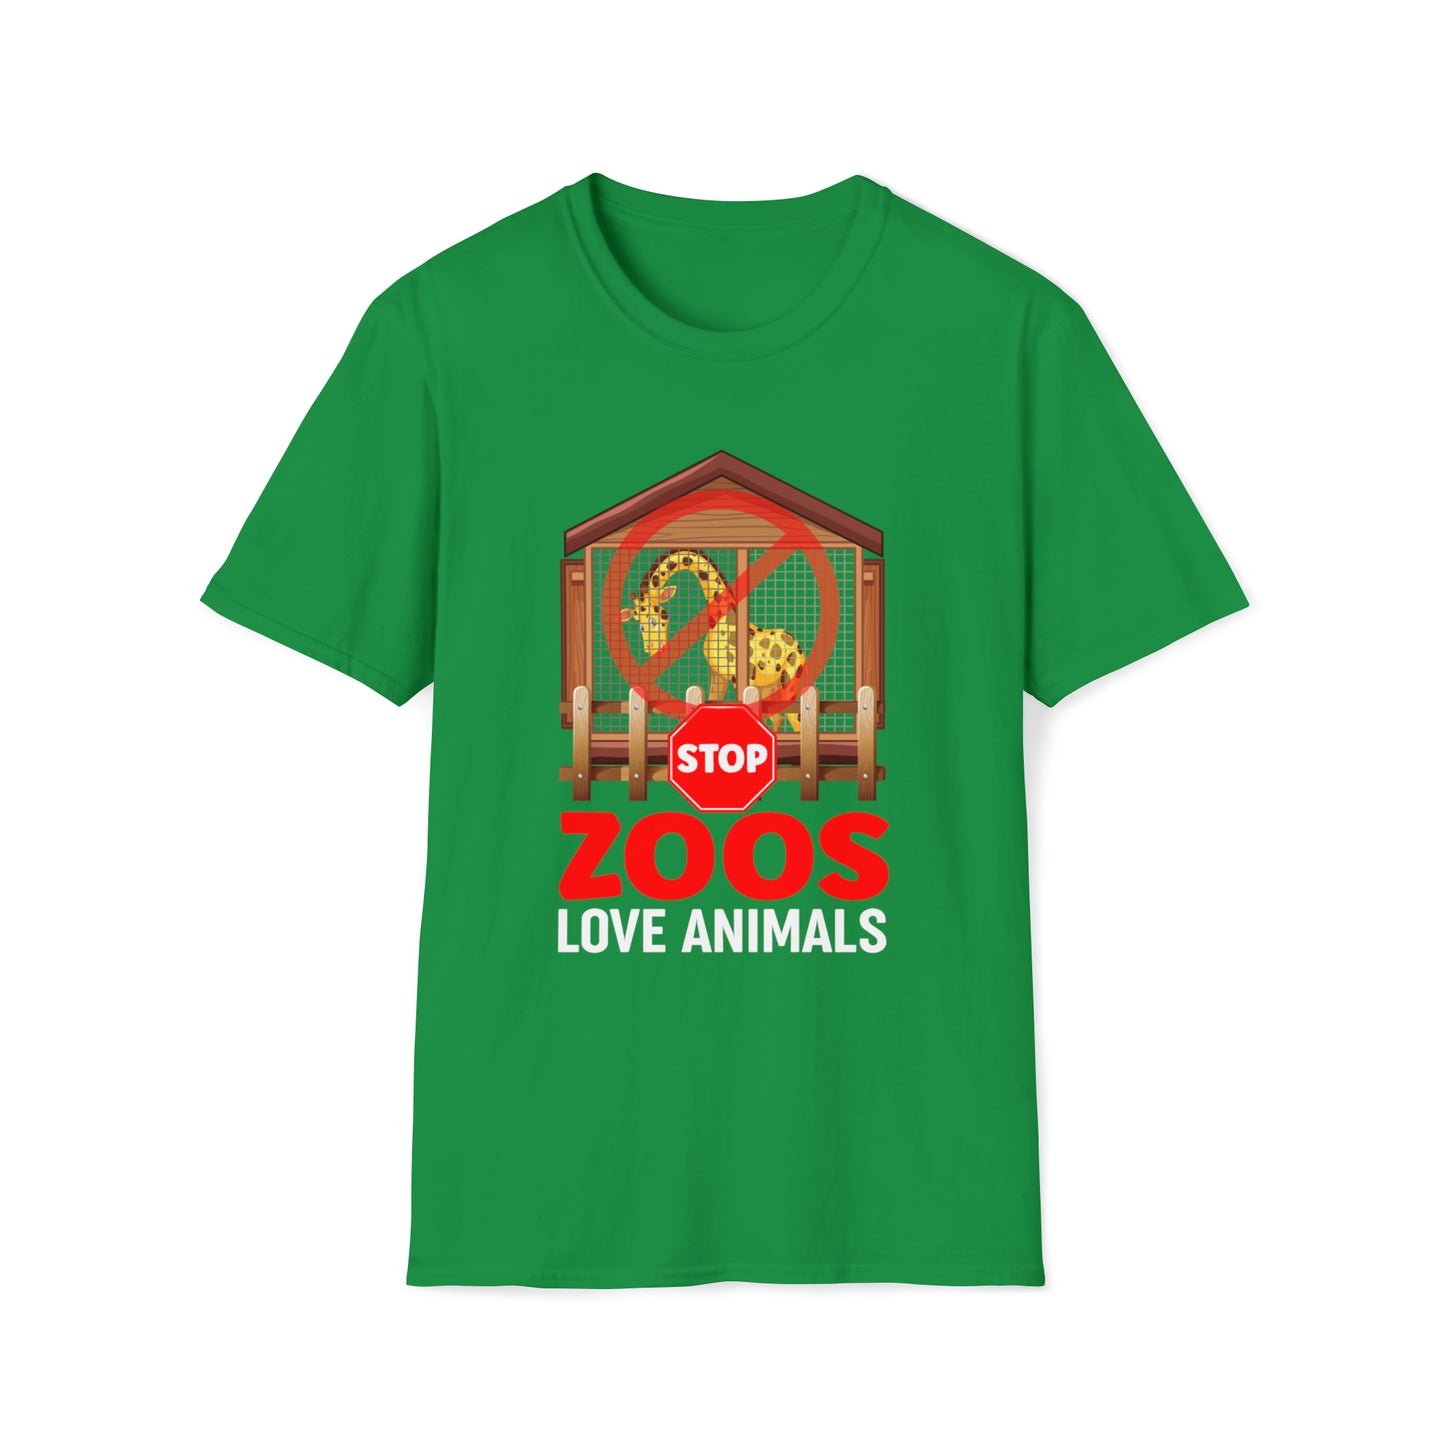 Stop Zoos Love Animals, Unisex Softstyle T-Shirt, Anti Zoo Shirt, Animal Rights Clothing, Mistywilderness